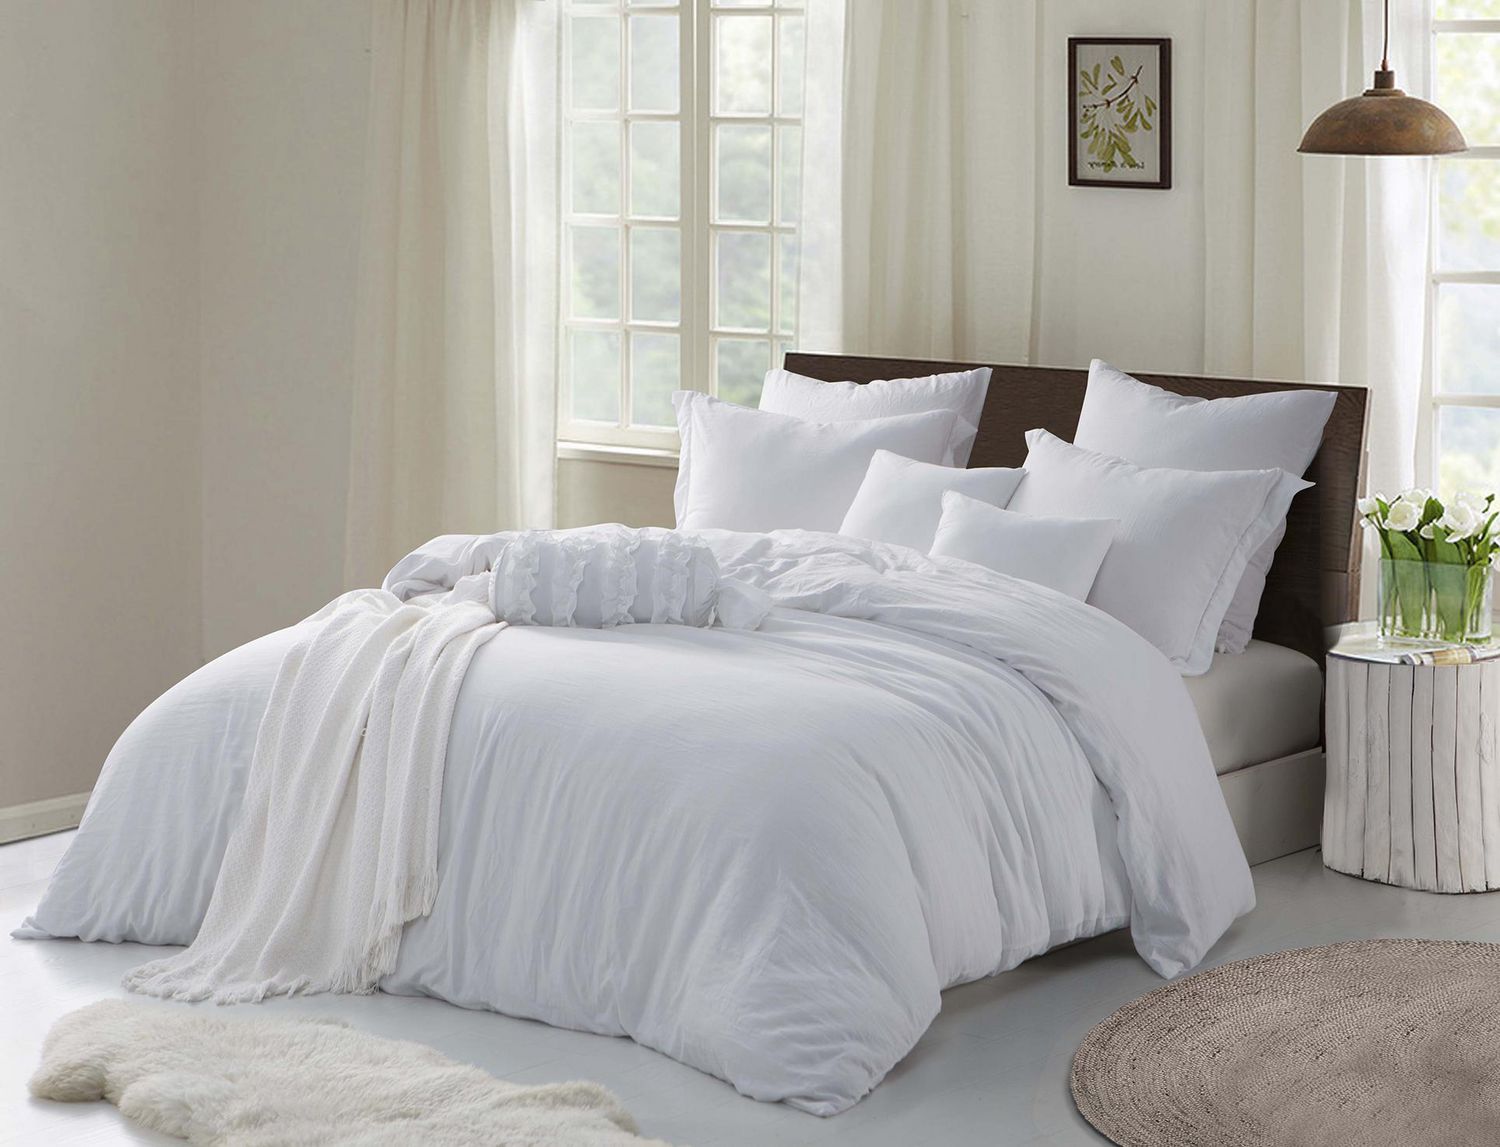 Crinkle Prewashed Duvet Cover Set, Does A King Size Duvet Look Better On Double Bed